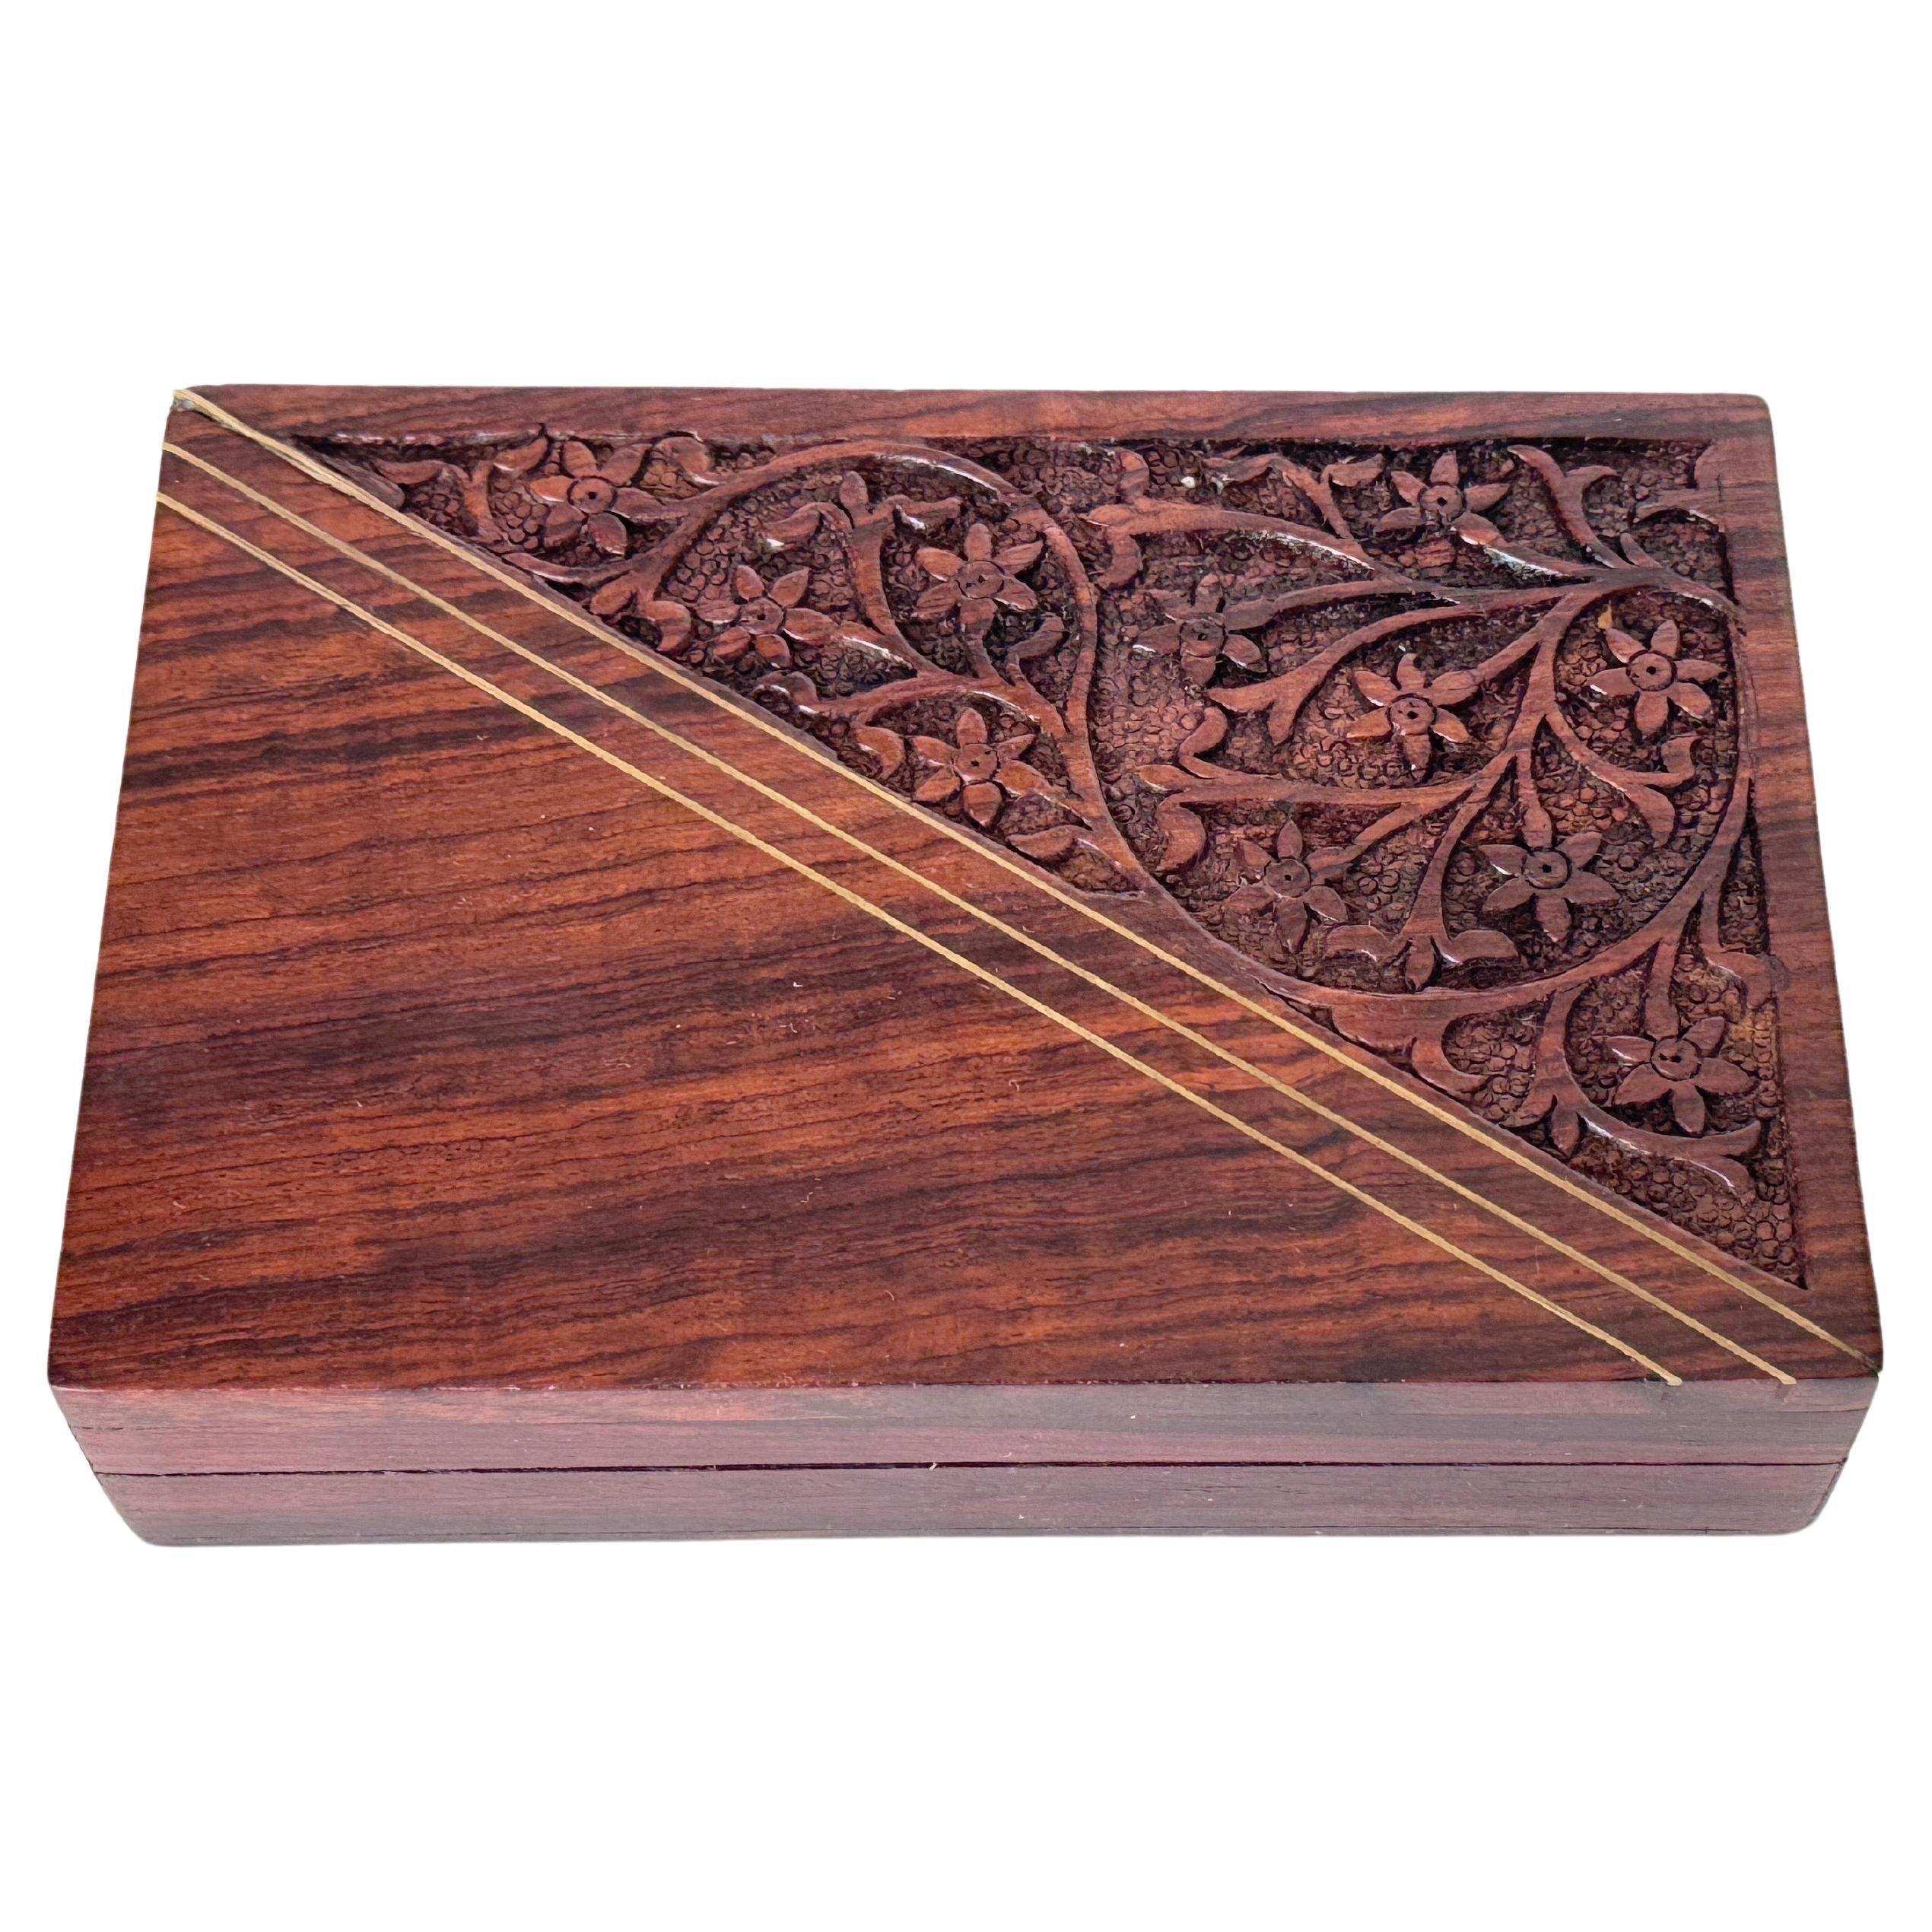 Decorative Box for Cigarettes in  wood brown color India